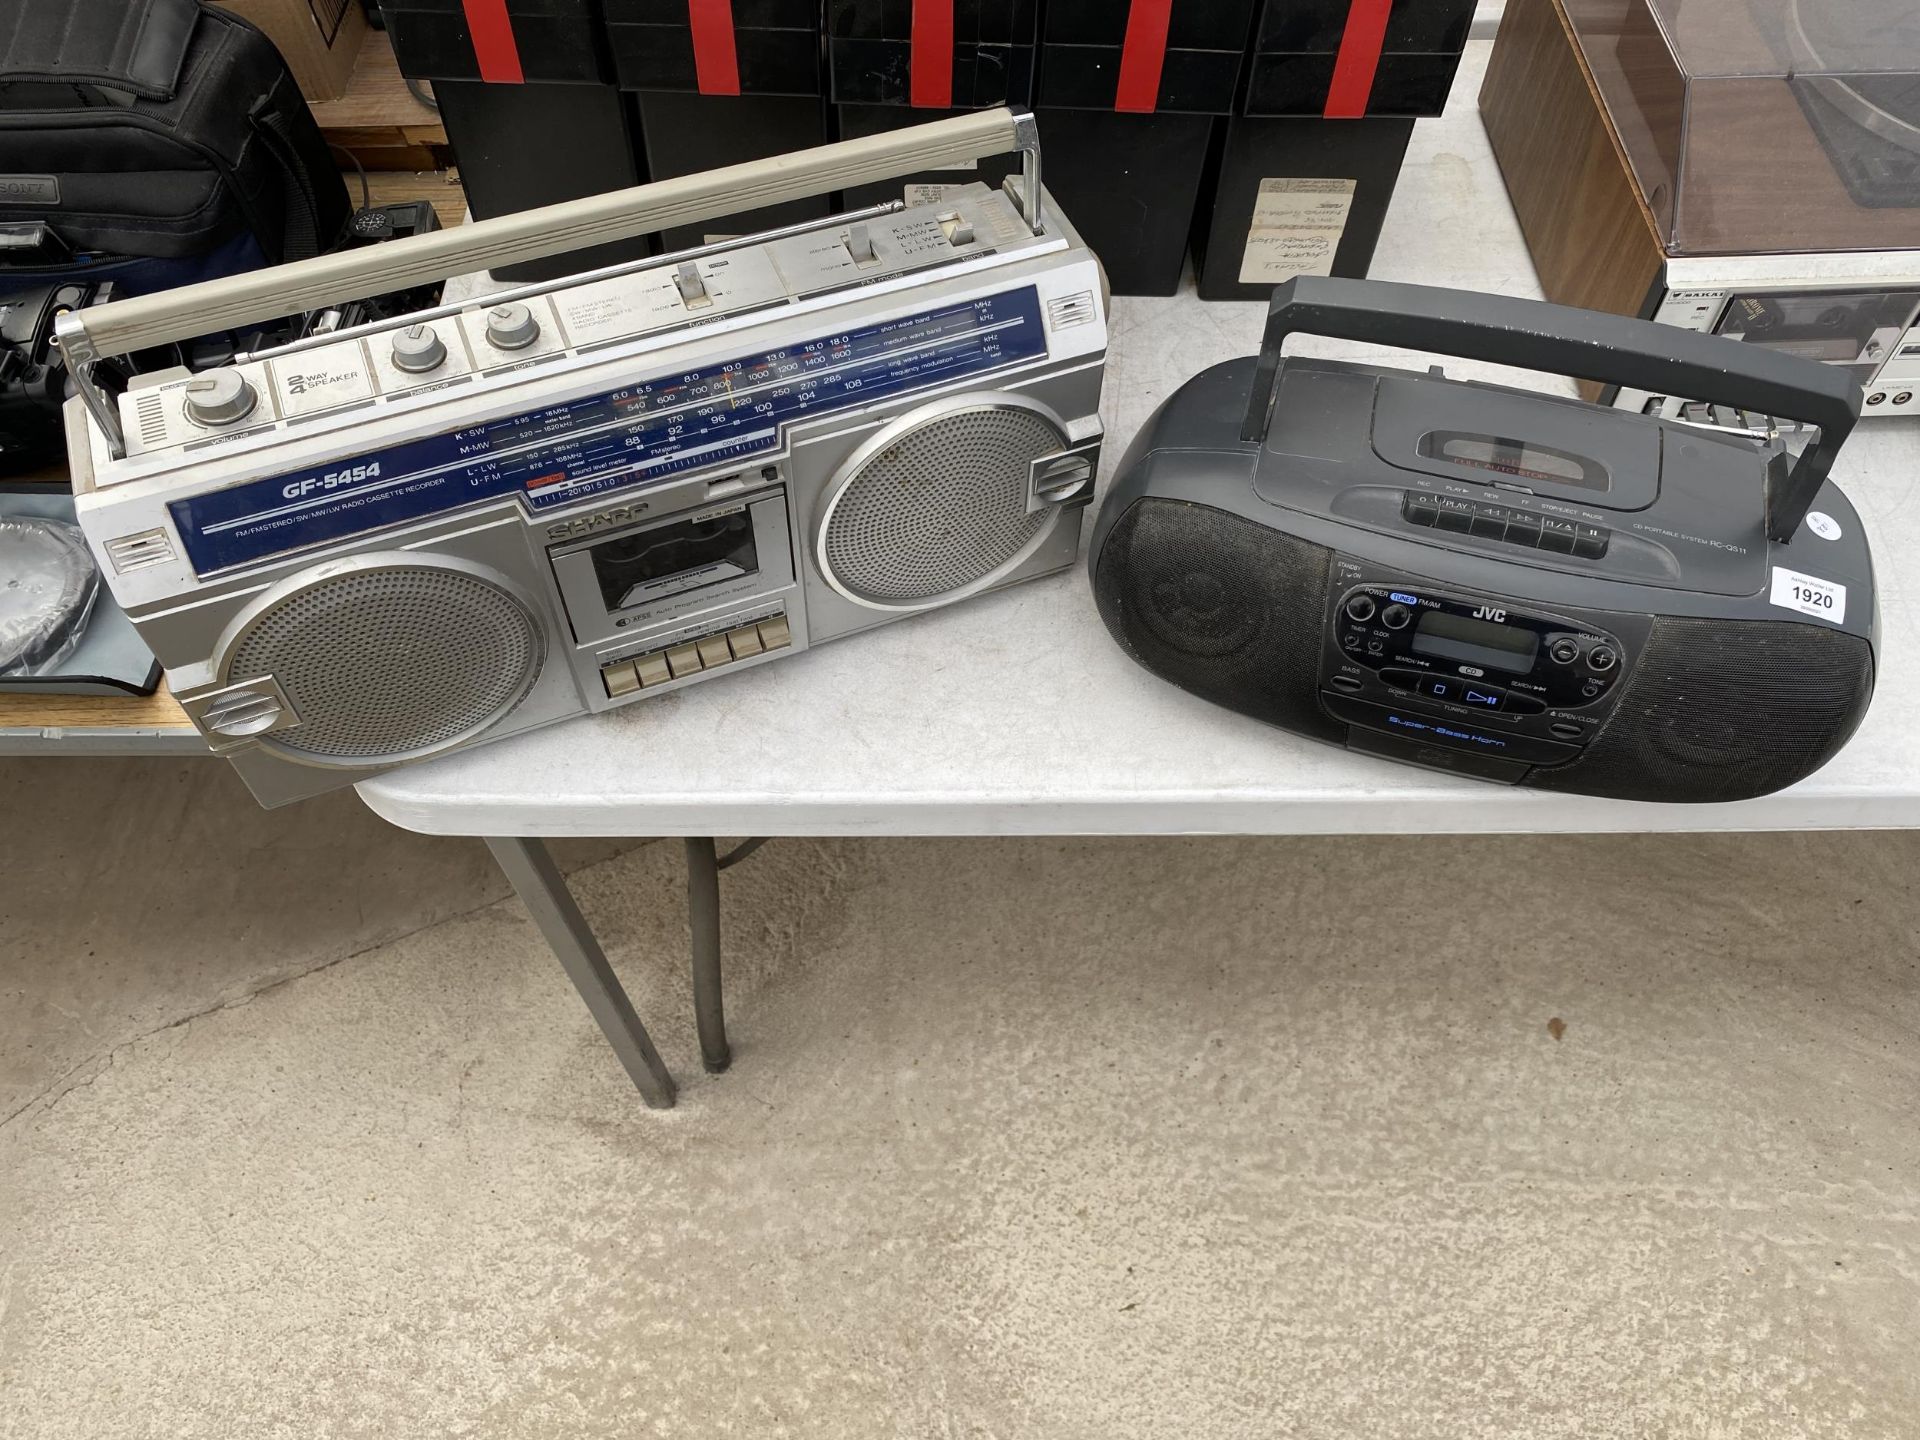 A SHARP GF-5454 FM STEREO SYSTEM AND A FURTHER JVC RADIO